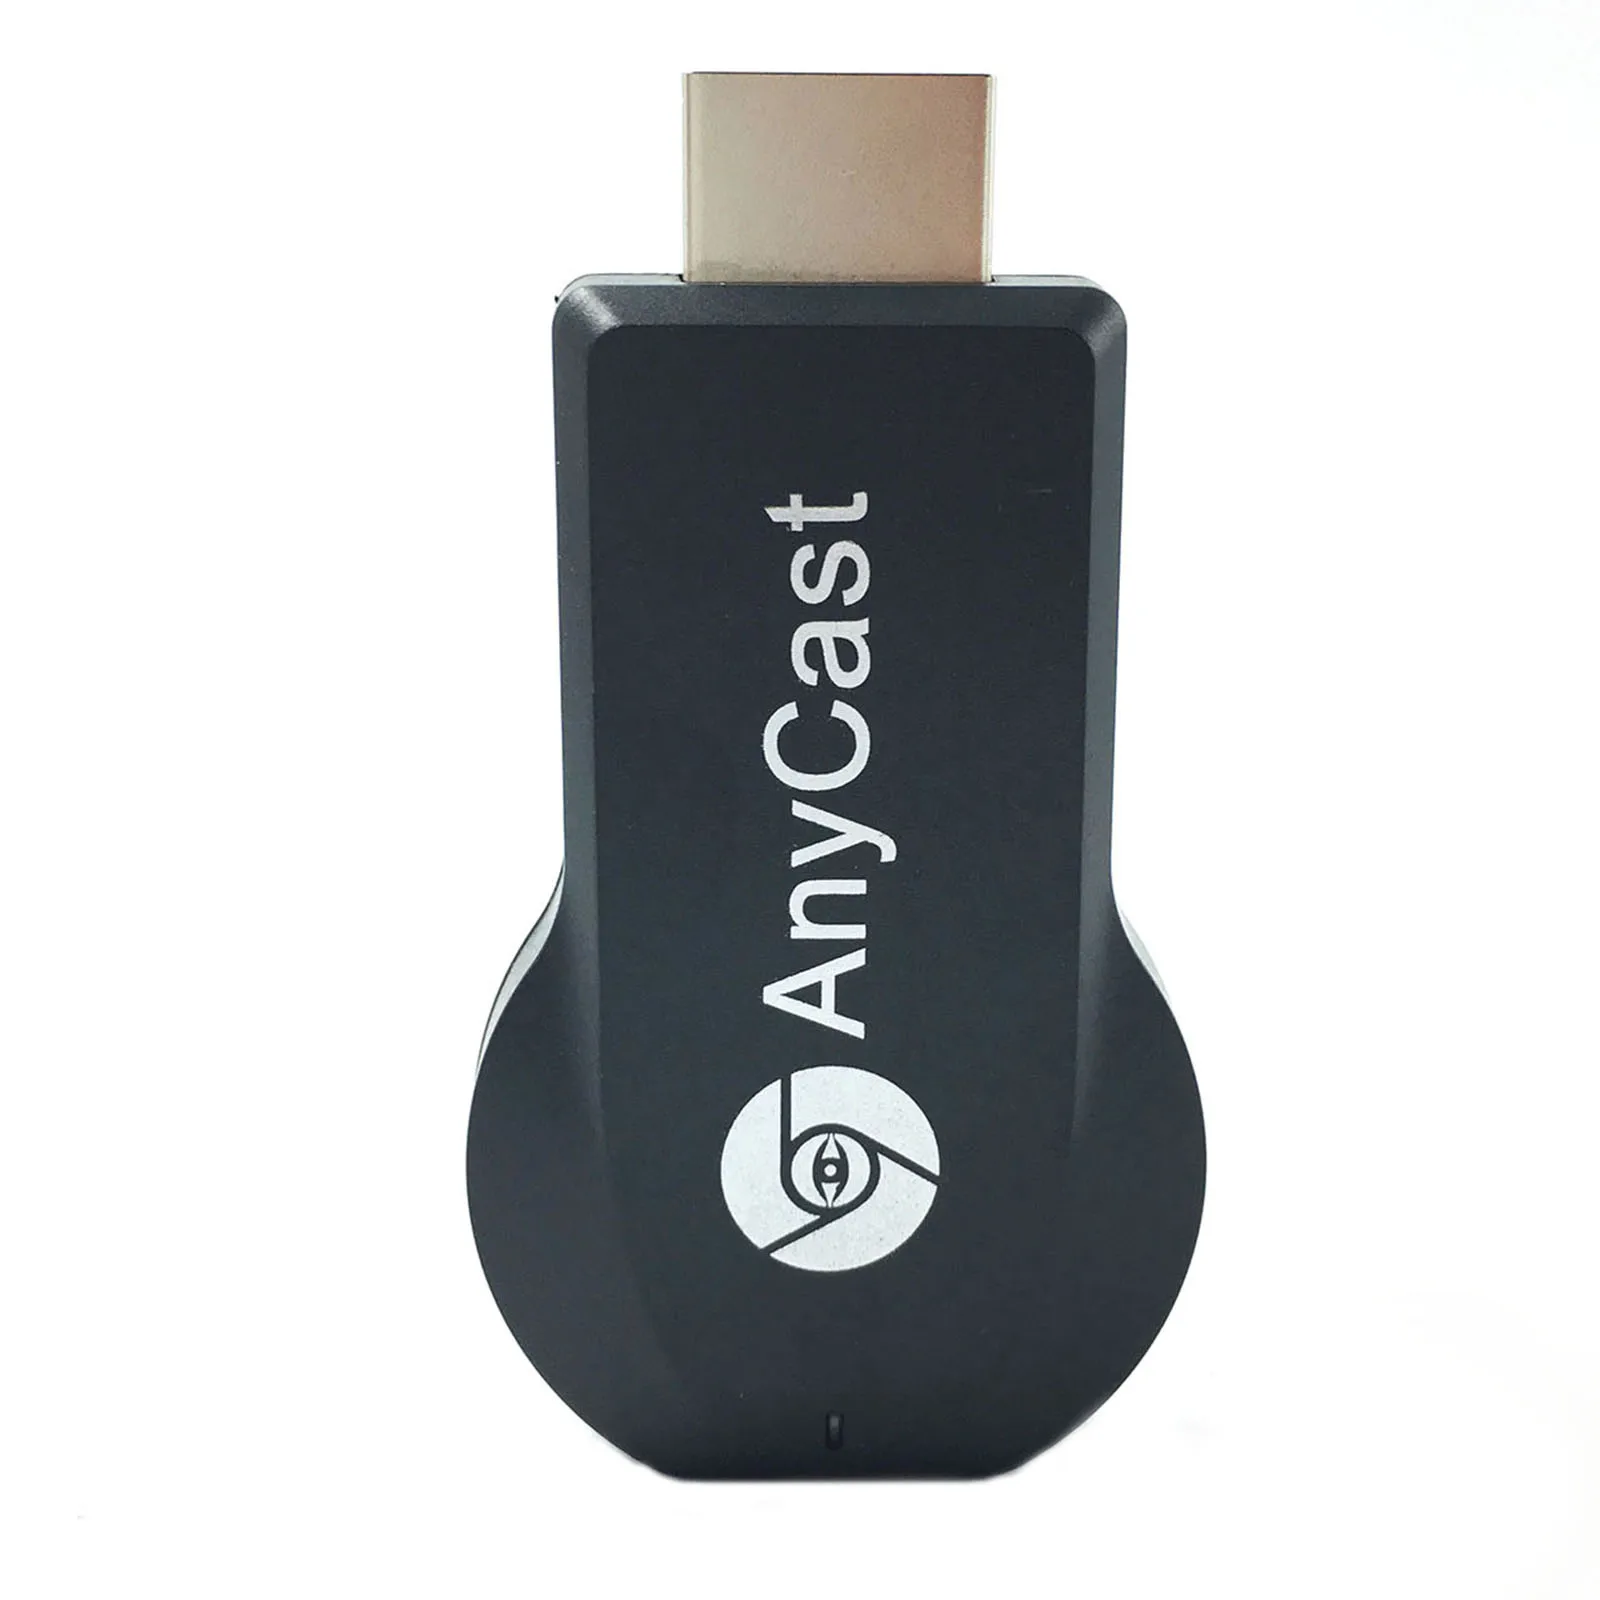 

AnyCast M2 TV Stick Dongle HDMI-compatible 1080P Miracast DLNA Airplay WiFi Display/HD/Media